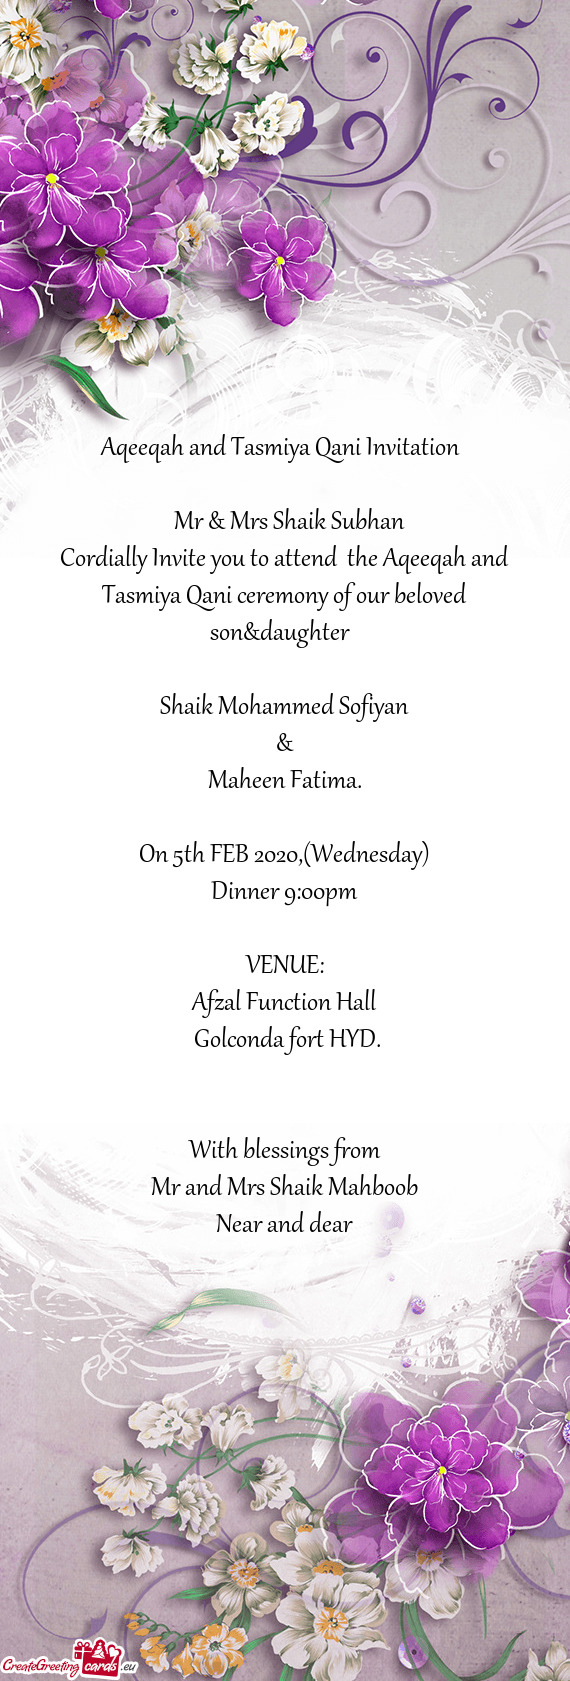 Cordially Invite you to attend the Aqeeqah and Tasmiya Qani ceremony of our beloved son&daughter